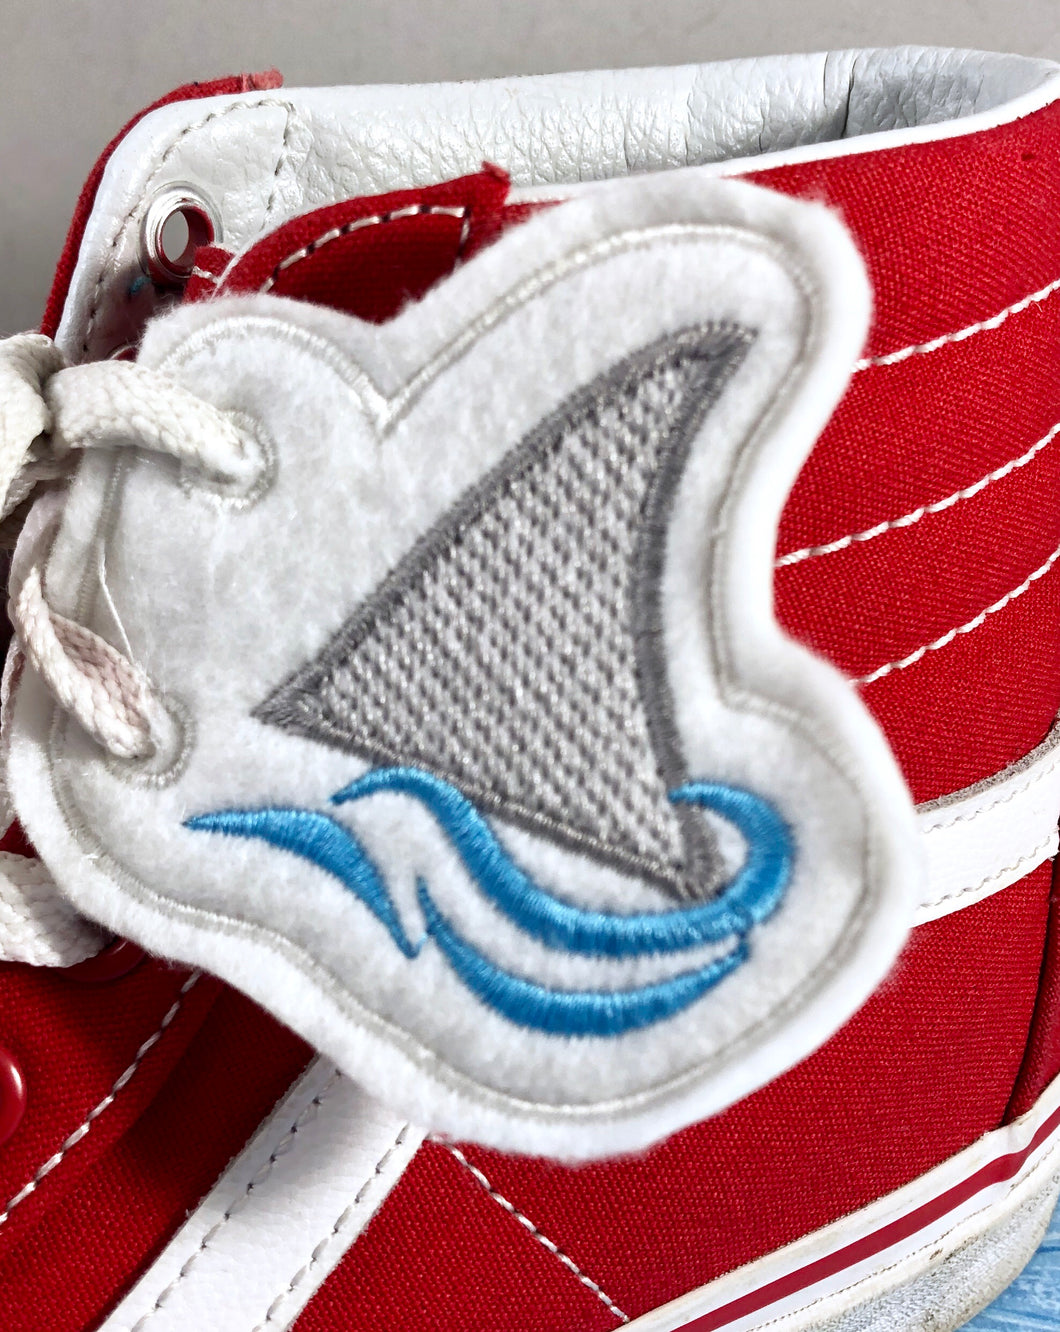 Shark Fin Shoe Wings embroidery design